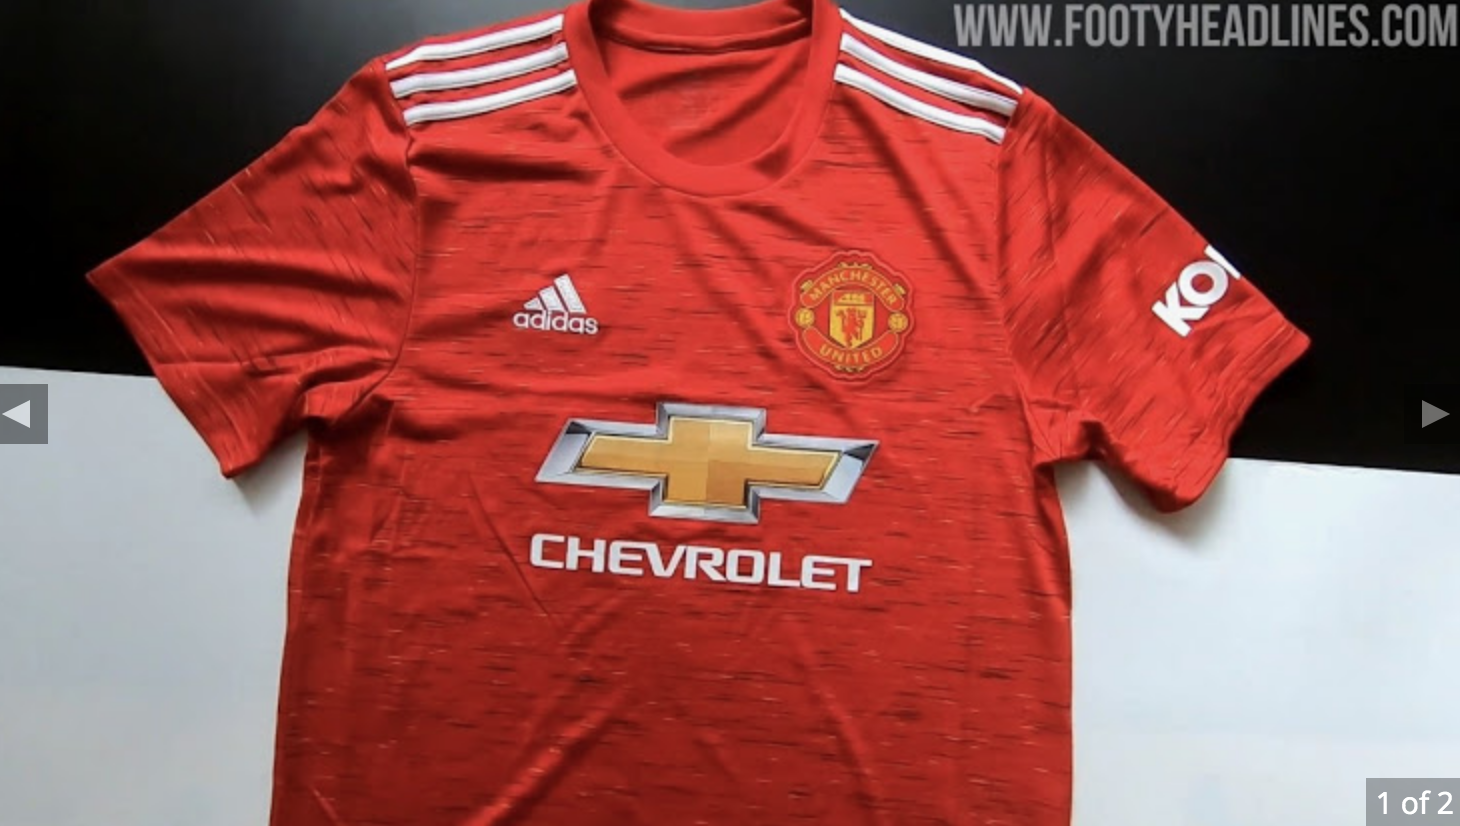 Manchester United S New Home Kit For 2020 21 Season Has Been Leaked Balls Ie